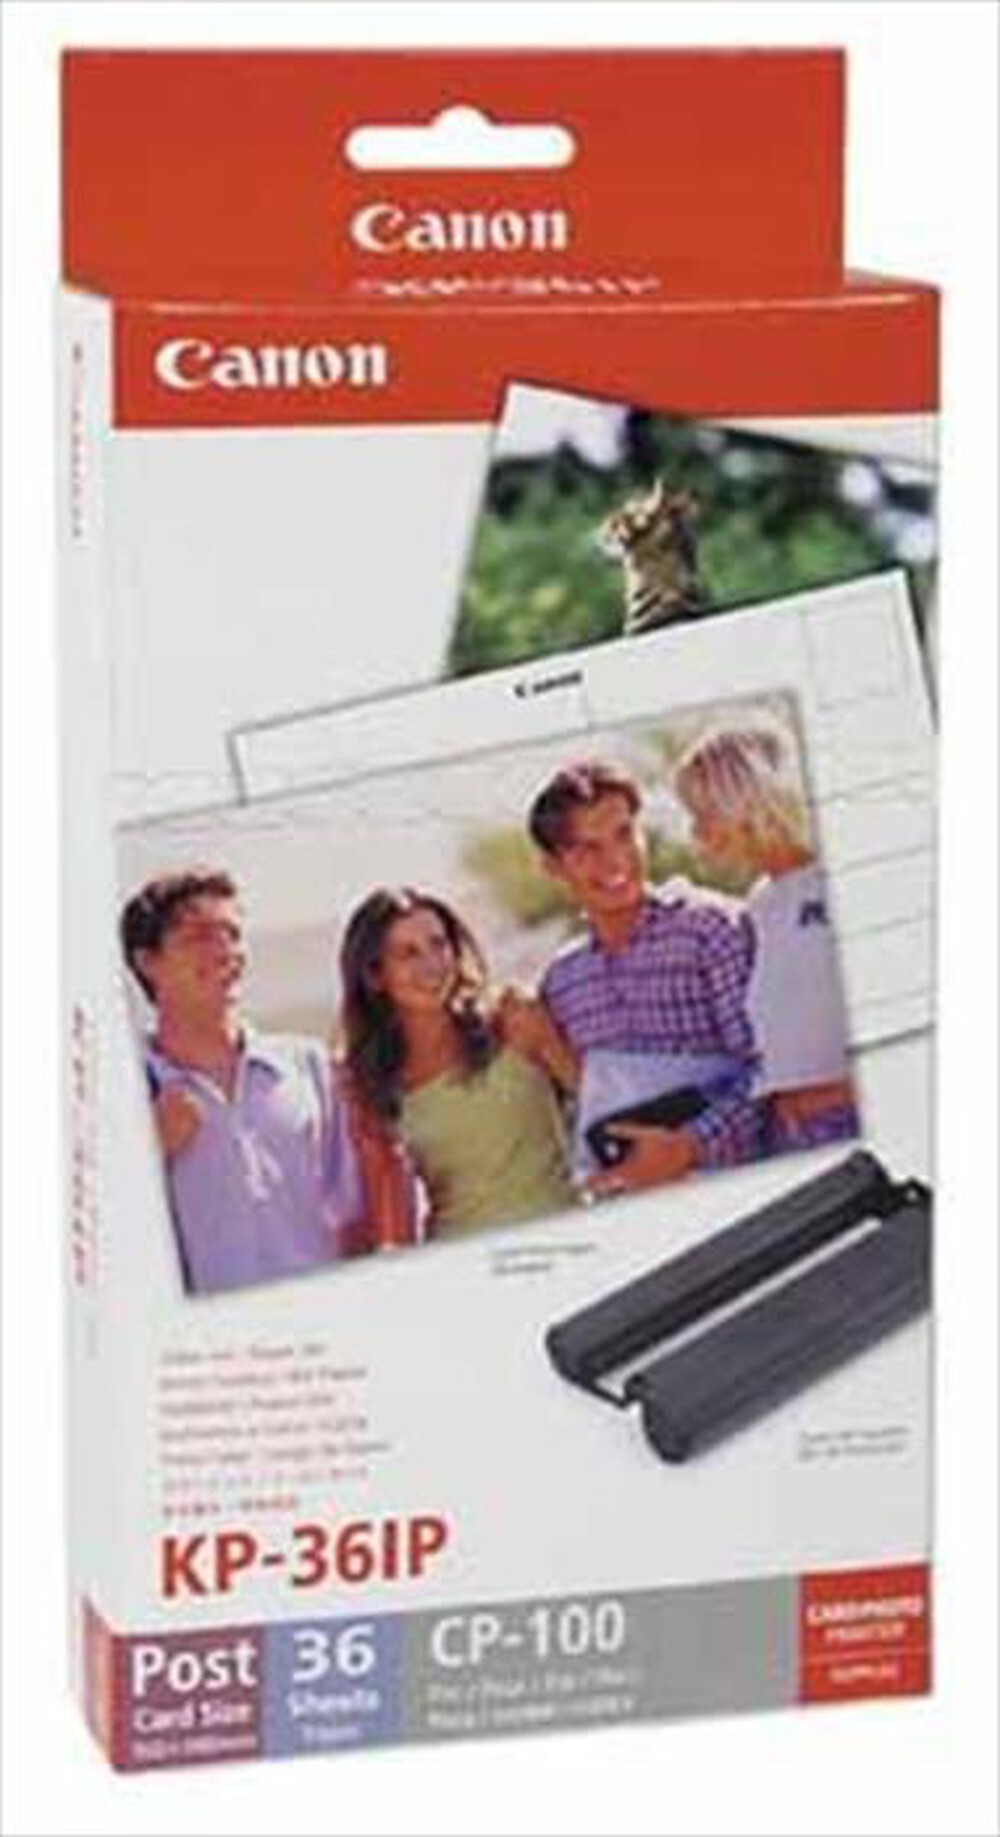 "CANON - KP-36IP Ink Paper-Set - White"